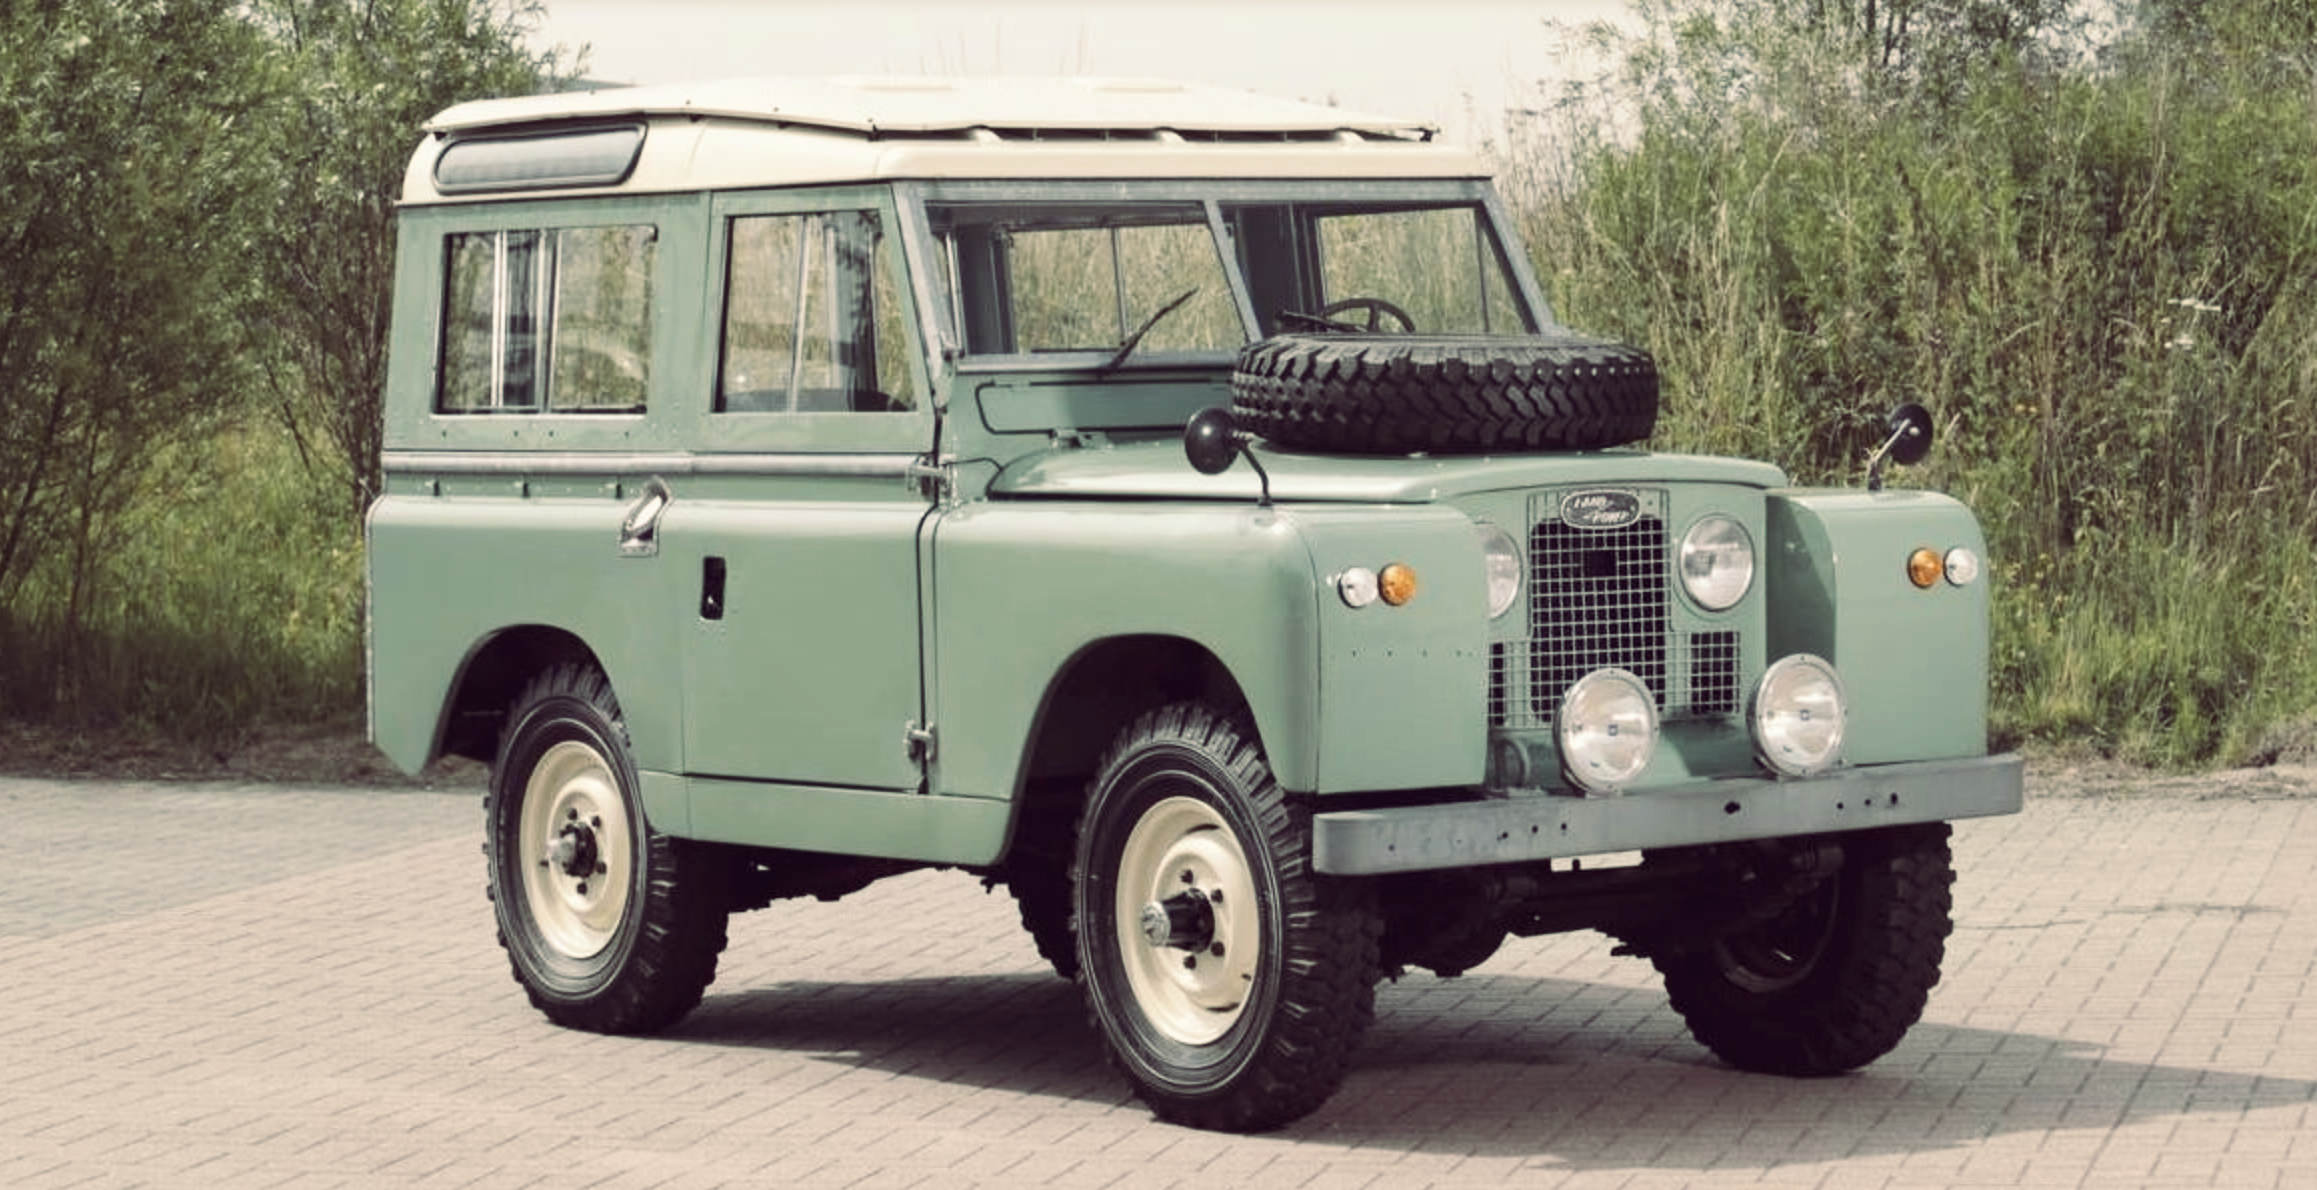 Learn about 105+ images 1970 land rover series 2 - In.thptnganamst.edu.vn